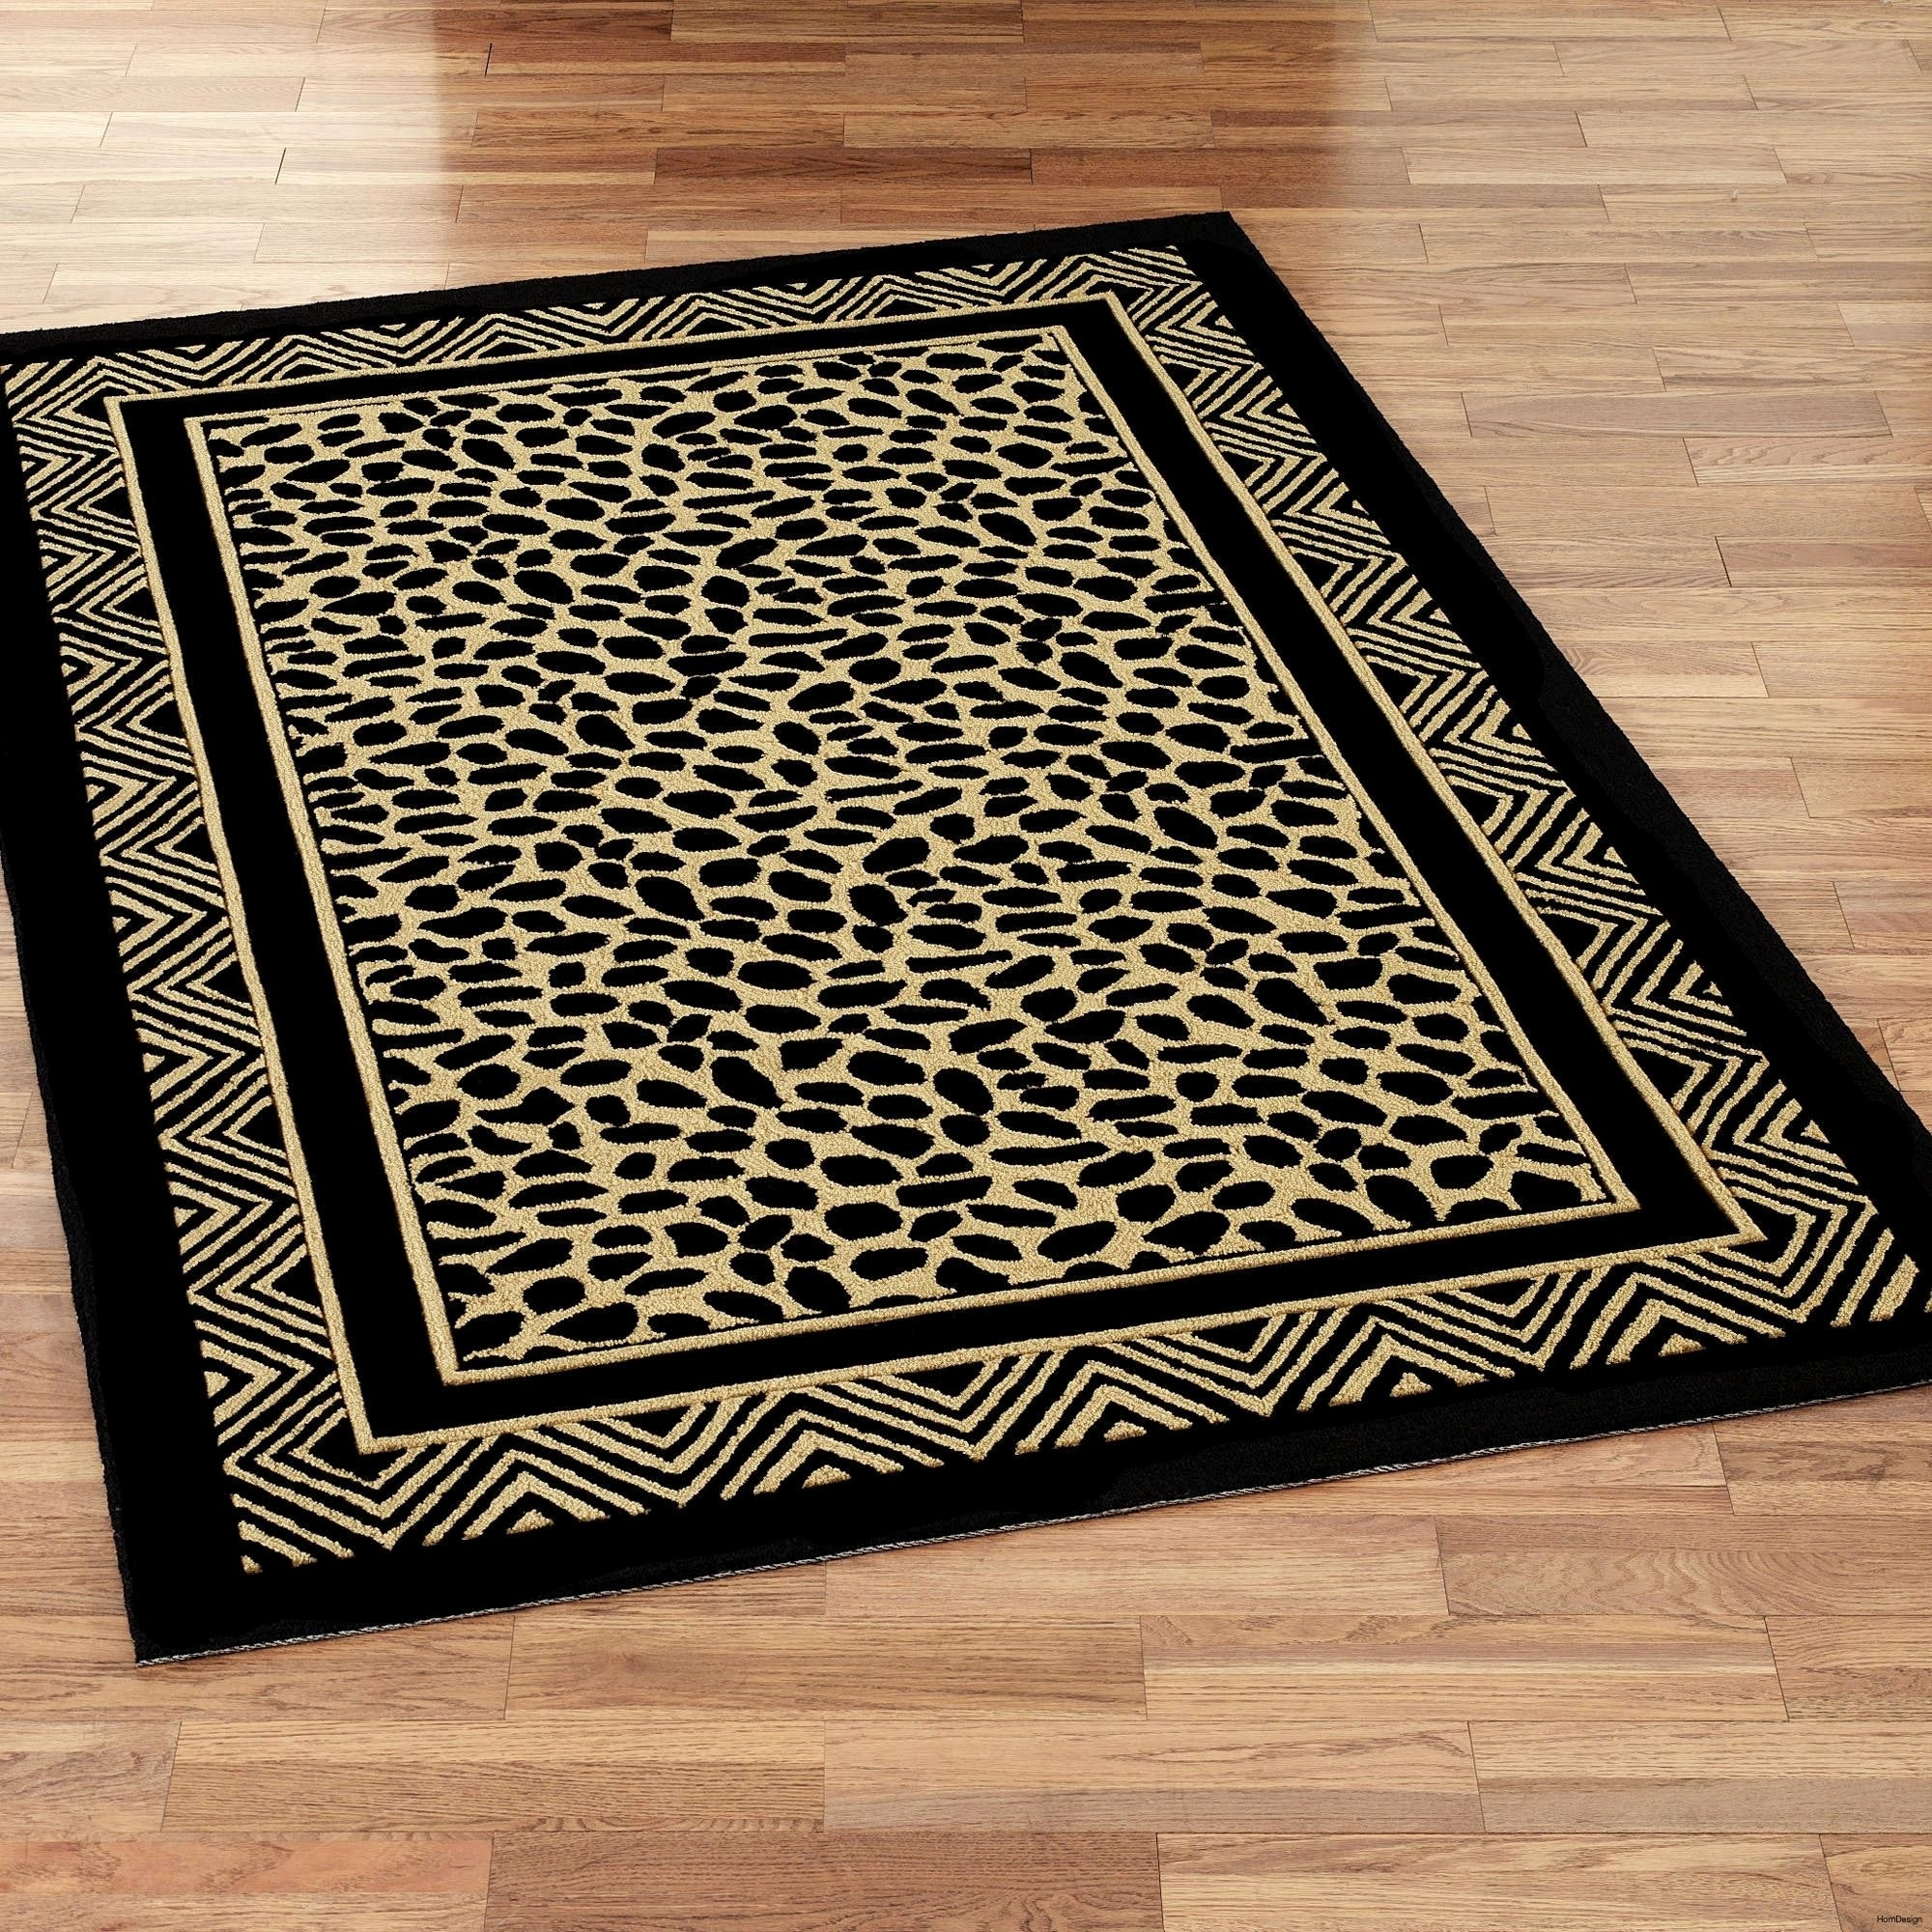 17 Nice Hardwood Floor Upgrade Price 2024 free download hardwood floor upgrade price of blue and grey area rugs new area rugs for hardwood floors best jute pertaining to blue and grey area rugs elegant area rugs for cheap stunning rugged new chea